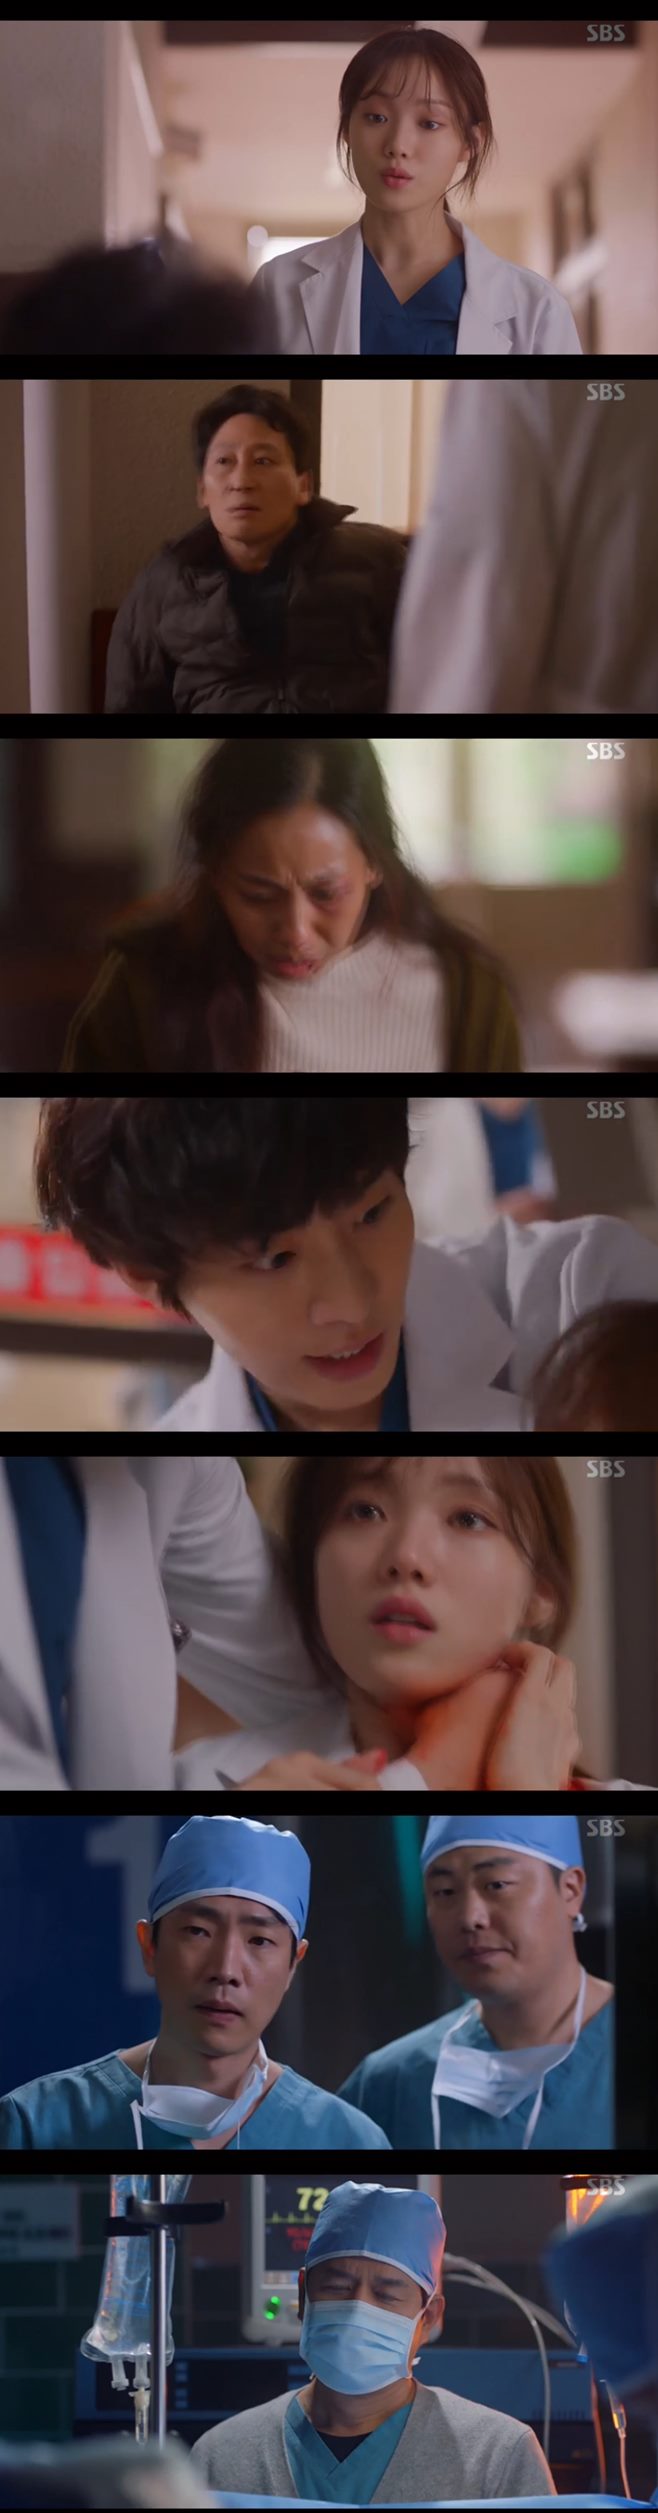 Lee Sung-kyung, a romantic doctor, was stabbed by a patient and amplified extreme tension.In the 6th episode of SBSs Drama Romantic Doctor Kim Sabu 2 (directed by Kang Eun-kyung), which aired on the 21st night, the 6th episode of the drama, including Doldam Hospital, Physician, Han Suk-kyu, Wujin (Ahn Hyo-seop), Cha Eun-jae (Lee Sung-kyung), Park Min-guk (Kim Joo-heon), and Bae Medicaids of Moonjeong (Shin Dong-wook), Yoon Ae-rum (So Ju-yeon), Jung In-su (Yoon Na-nam), Yeo Un-yeong (Kim Hong-pa), Oh Myung-sim (Jin Kyung), Jang Gi-tae (Jin Won-hee), Nam Do-il (Byeon Woo-min), Park Eun-tak (Kim Min-jae), Yang Ho-joon (Ko Sang-ho), Shim Hye-jin (Park Hyo-ju), Heo Young-gyu (Bae Myung-jin), Do Yun-wan (Cho), and Ju Young-mi (Yoo Bo-ra) A story was drawn.On the same day, the head of the Doldam Hospital, Yeo Un-young, left Doldam Hospital. Nurses Oh Myung-sim and Physician Nam Do-il were shocked and frustrated by the situation.I never did that without a reason, either Kim or the director, Nam said to the infuriating Oh, and I will tell you why I made this decision when the time comes.Lets wait, he said, expressing his belief in the master.Park Min-guk, the director of the hospital, was appointed as the director of the hospital after the operation left. He tried to take control of the hospital by suggesting the increase in wages of employees.Among them, Woojin and Eunjae still spent 24 hours in the Doldam Hospital, facing patients of various classes and situations they had to take care of.Woojin felt a dilemma in his situation to kill his family and save the patient who was brought in under the name of suicide.She was a colleague who could capture the pain of Woojin as if she were sympathetic to anyone else. She was saddened by the situation of Woojin suffering from bonds.Thats illegal, he said, adding that Woojin could not reveal his sincerity to Eun-jae in a difficult situation, and he showed a thorny attitude.Woojin turned coldly from the silver, saying, Do you like me or do not care.Later in the broadcast, Danger occurred; while taking care of a foreign woman who was subjected to domestic violence by her husband, Eun-jae was caught up in an accident.On this day, Eun-jae repeatedly rushed to his husband to protect his wife who was assaulted by her husband.Violence against people who are weaker than themselves is the worst of the worst and the worst of the worst. At this time, the foreign wife rushed to her husband with a cutter knife, and the cutter knife cut the neck of the silver.Woojin jumped straight at Eun-jae, amplifying the tension.